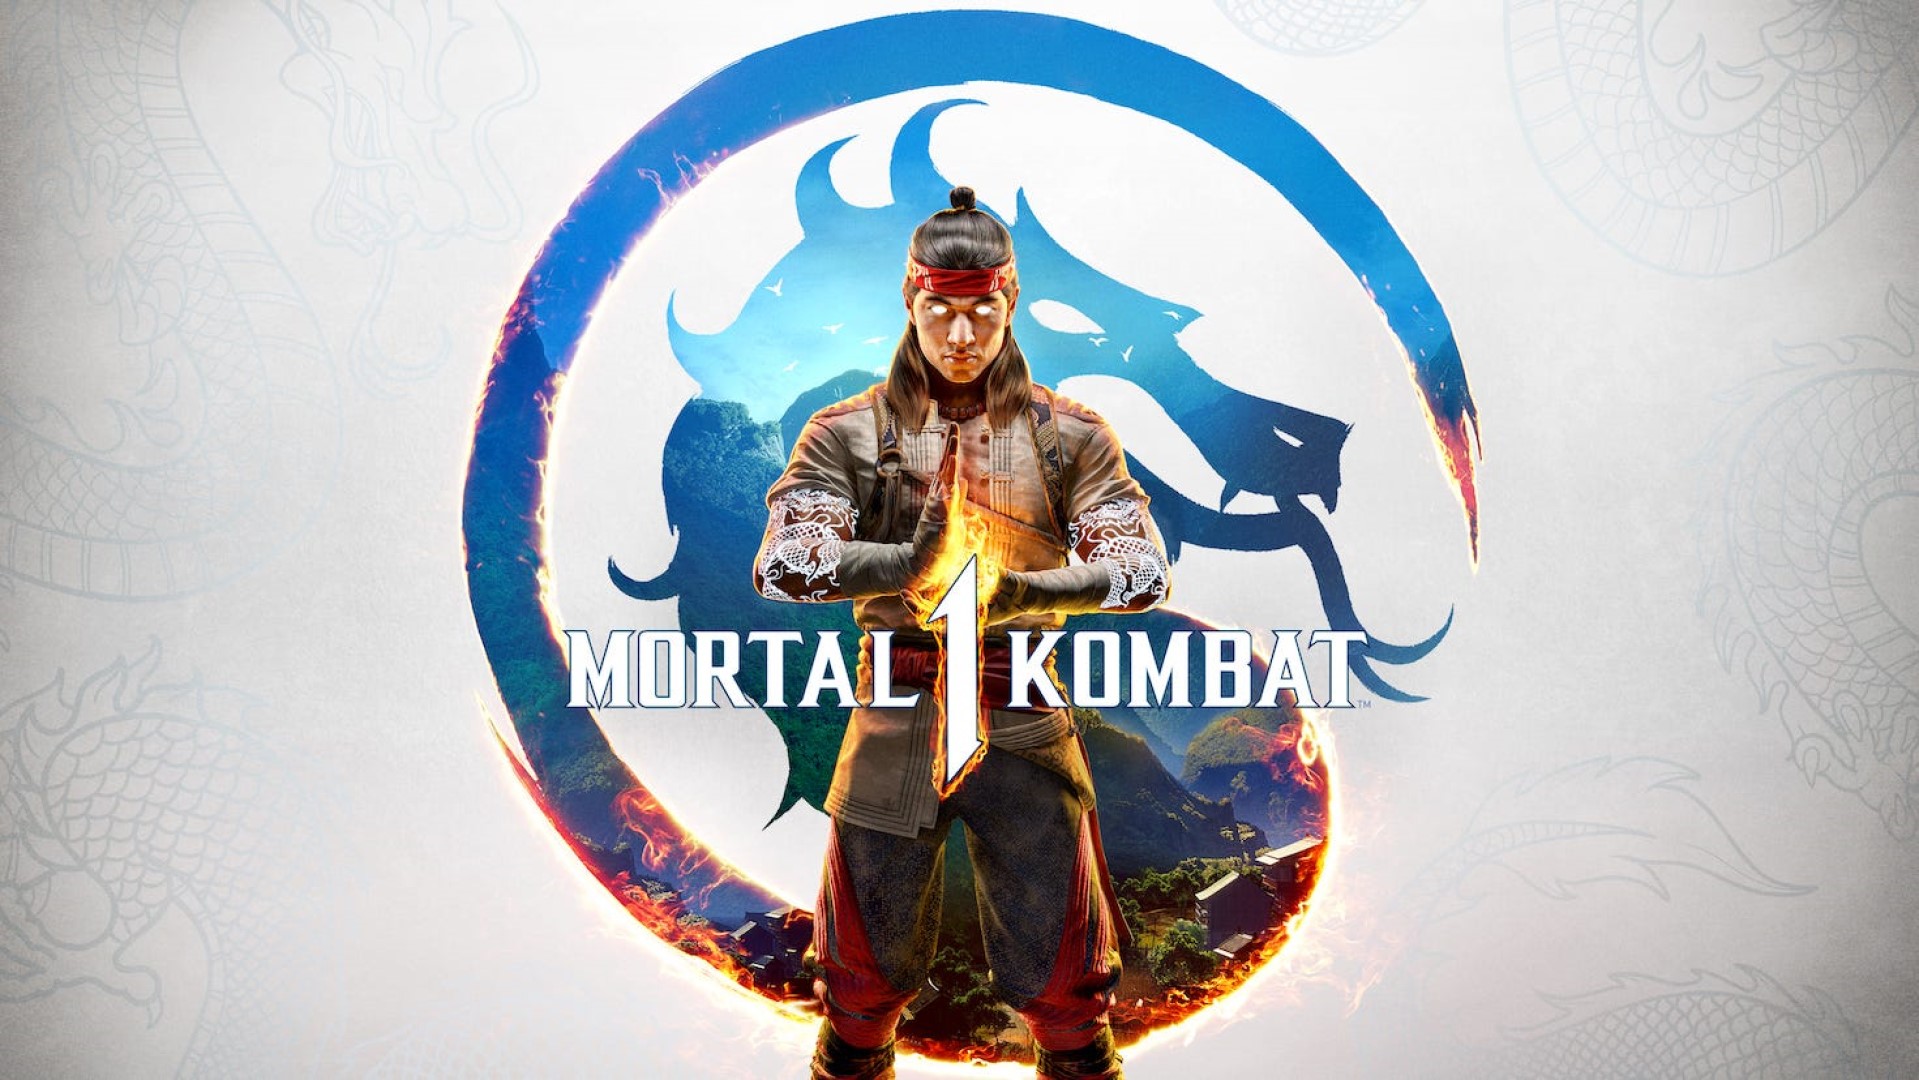 Mortal Kombat 1 – New Gameplay Trailer Coming “Soon” With More Character Reveals